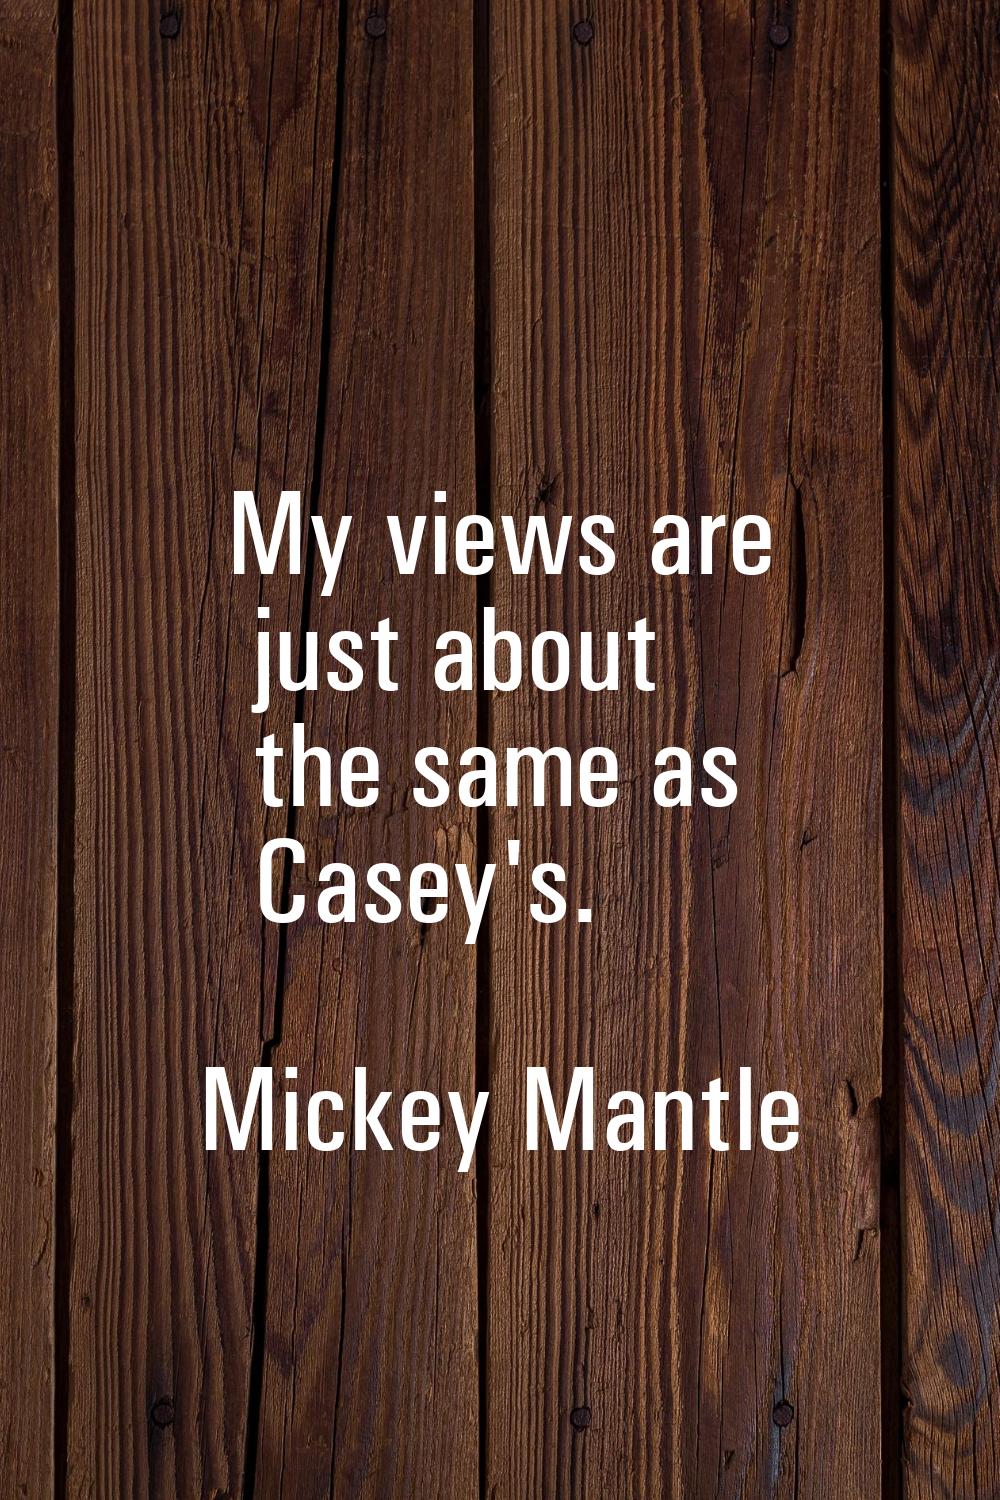 My views are just about the same as Casey's.